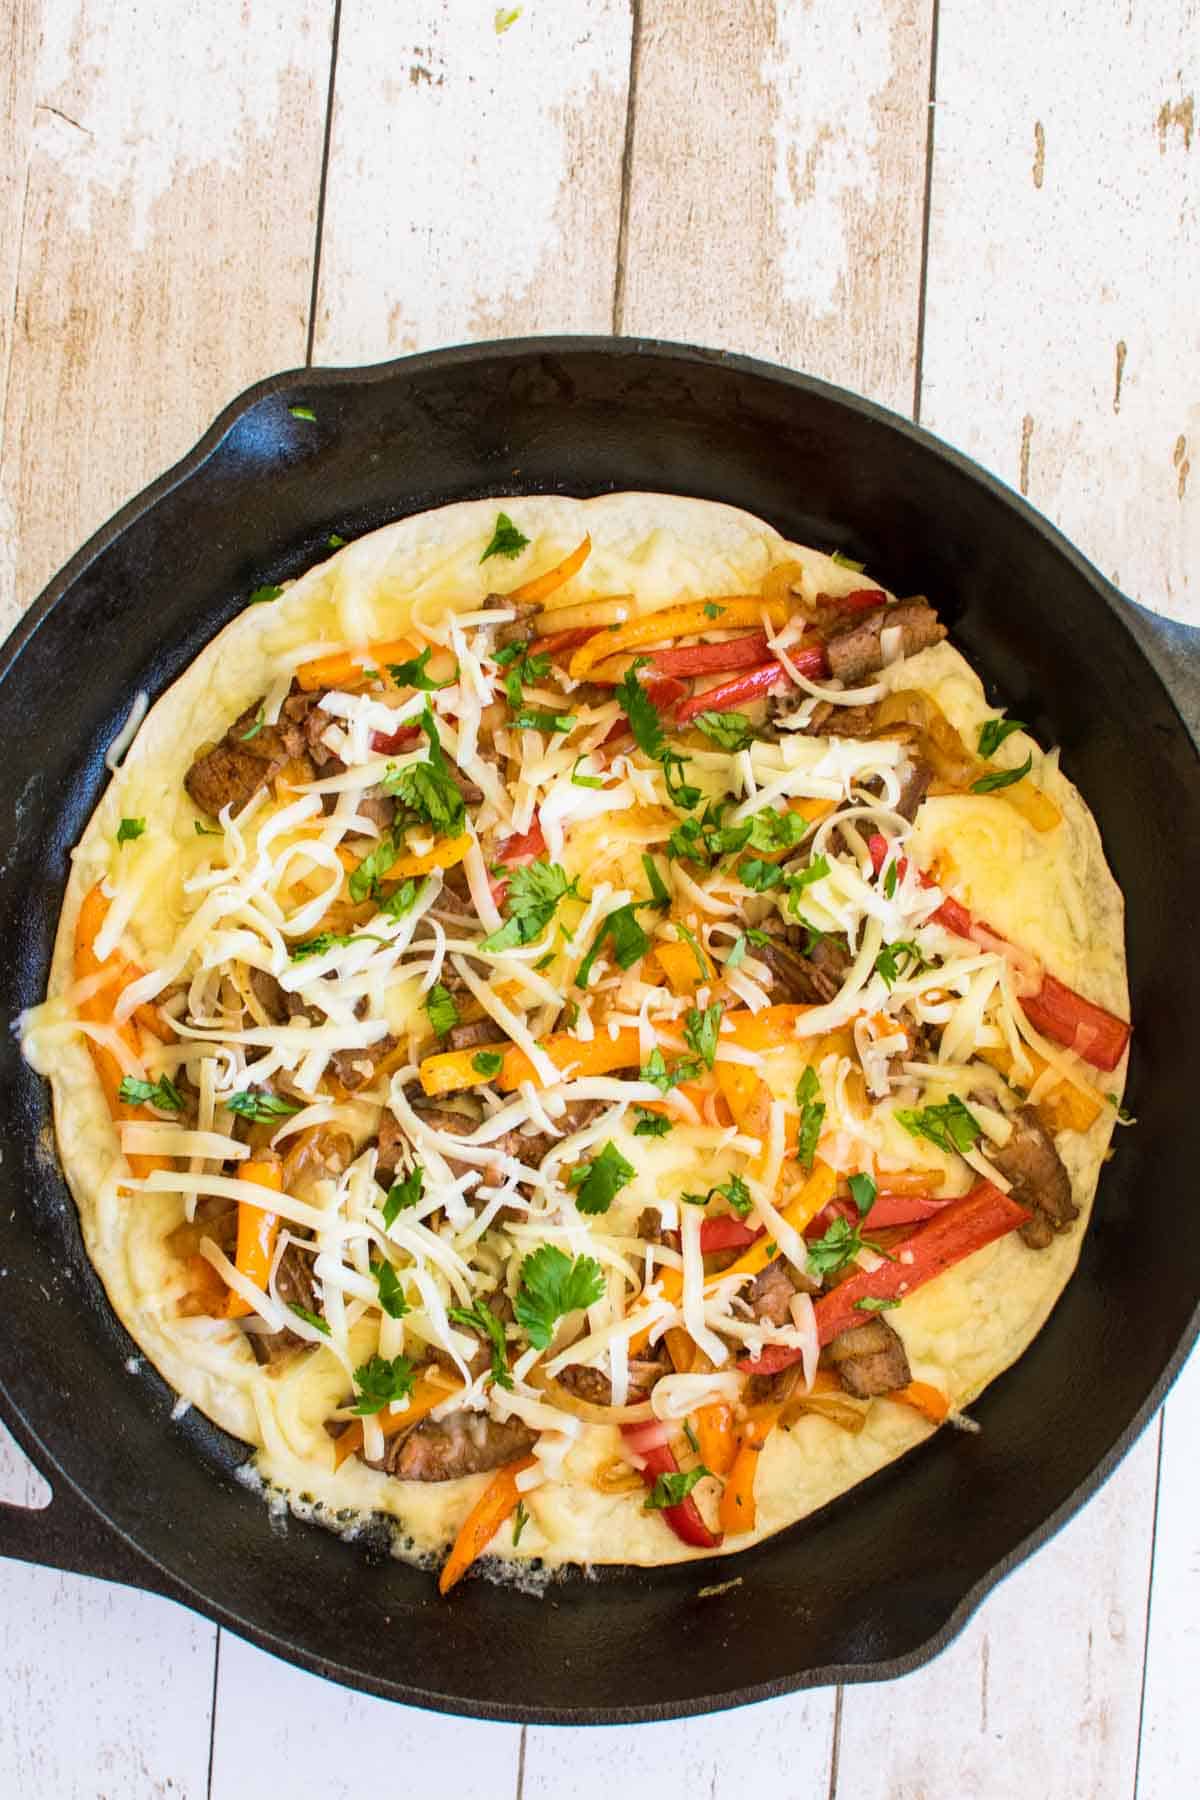 A tortilla in a skillet with sliced peppers, onions, and steak, sprinkled with grated cheese.